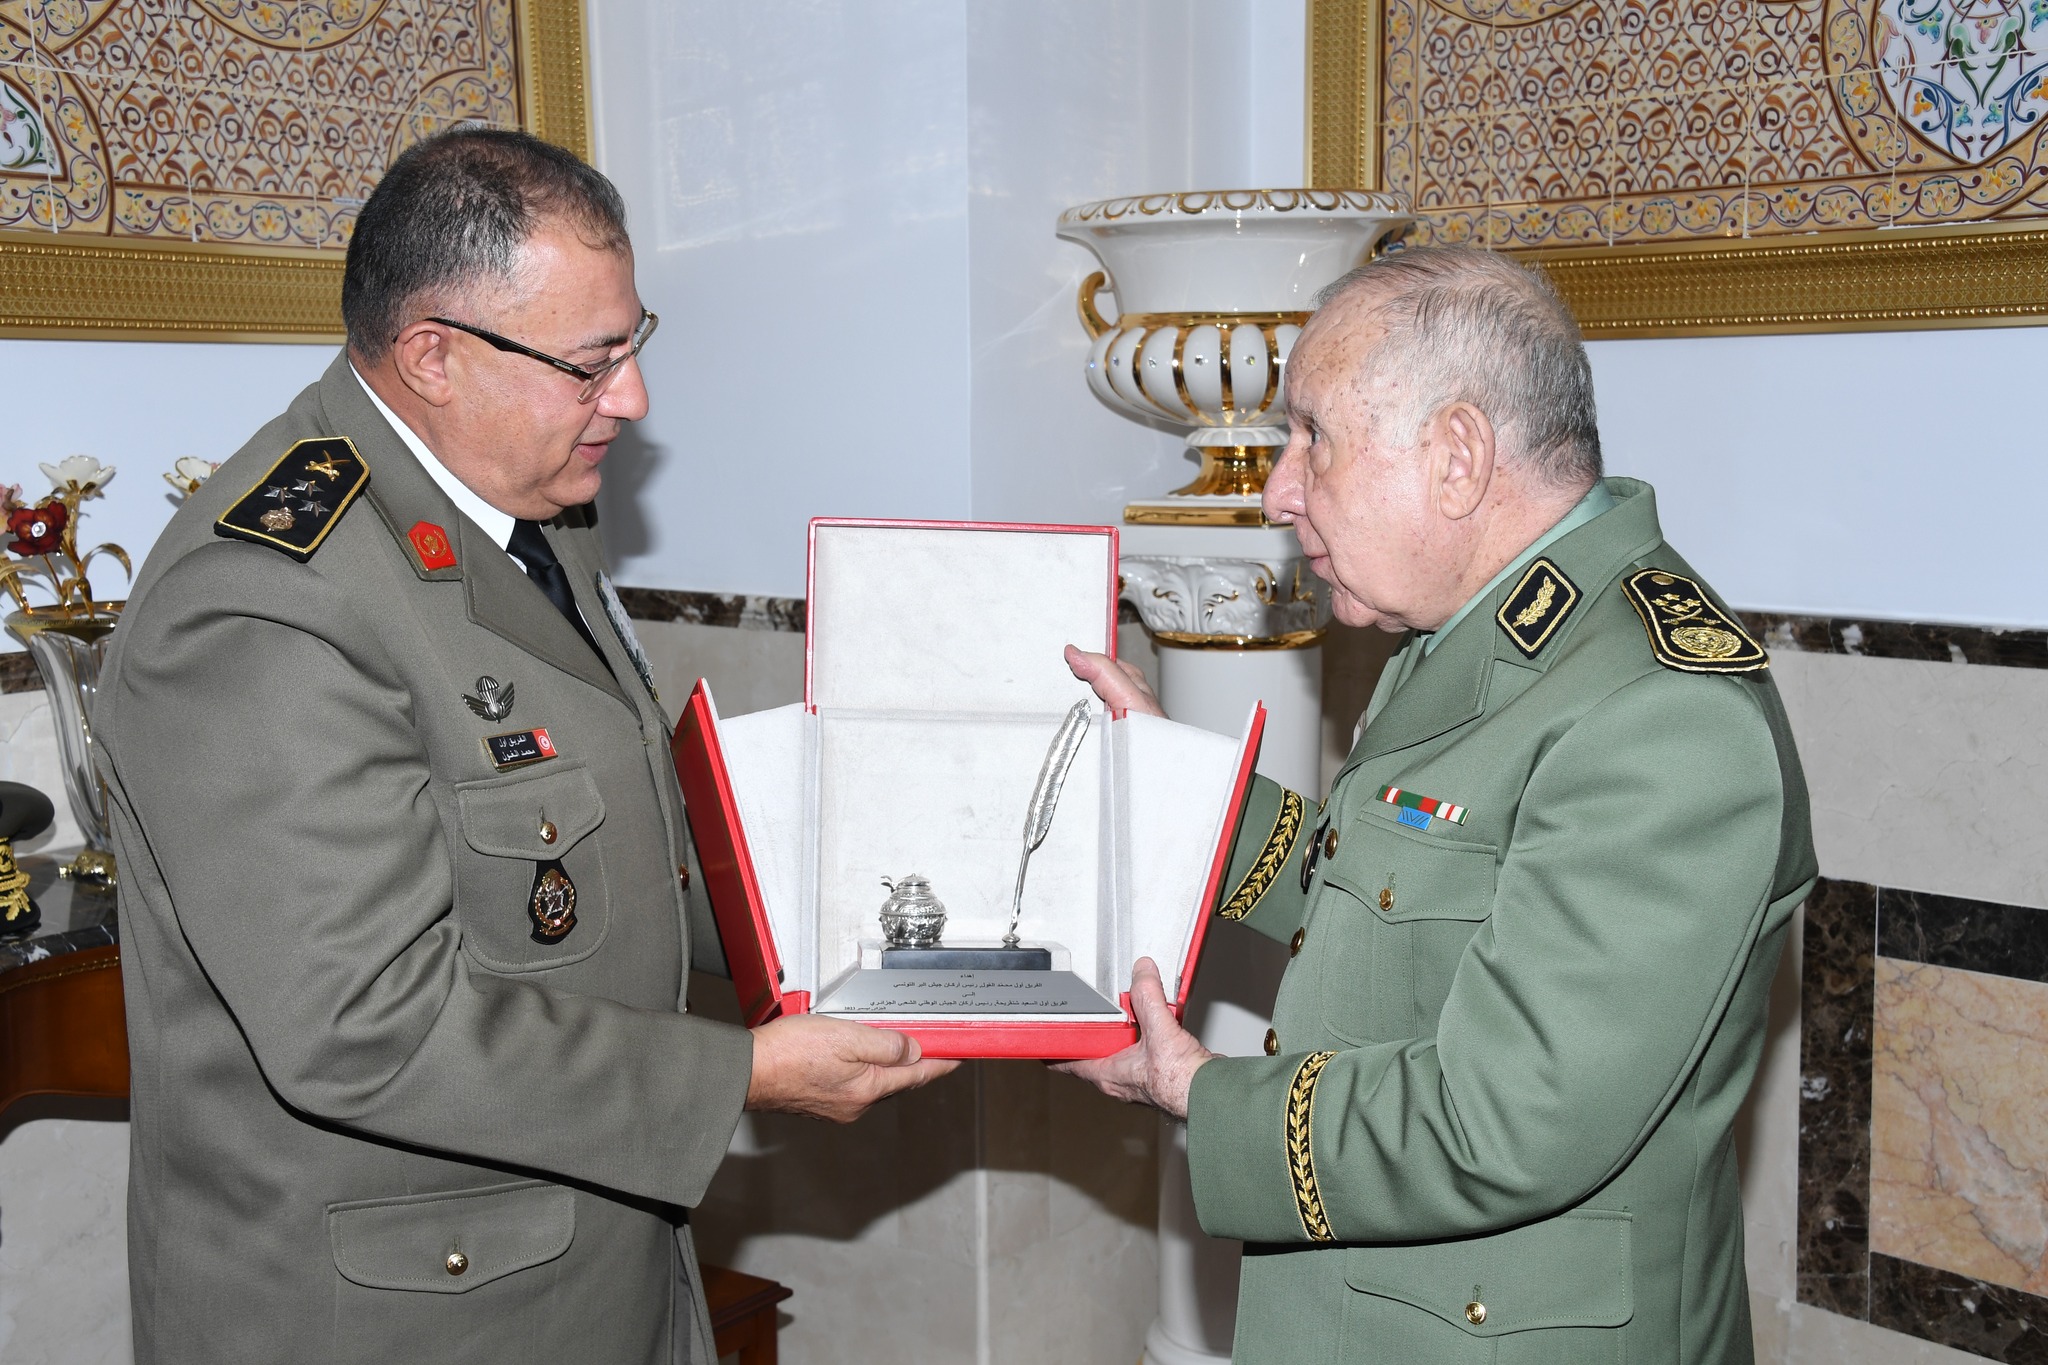 In pictures.. Lieutenant General Saeed Chengriha receives the Chief of Staff of the Tunisian Armed Forces - Algerian Dialogue